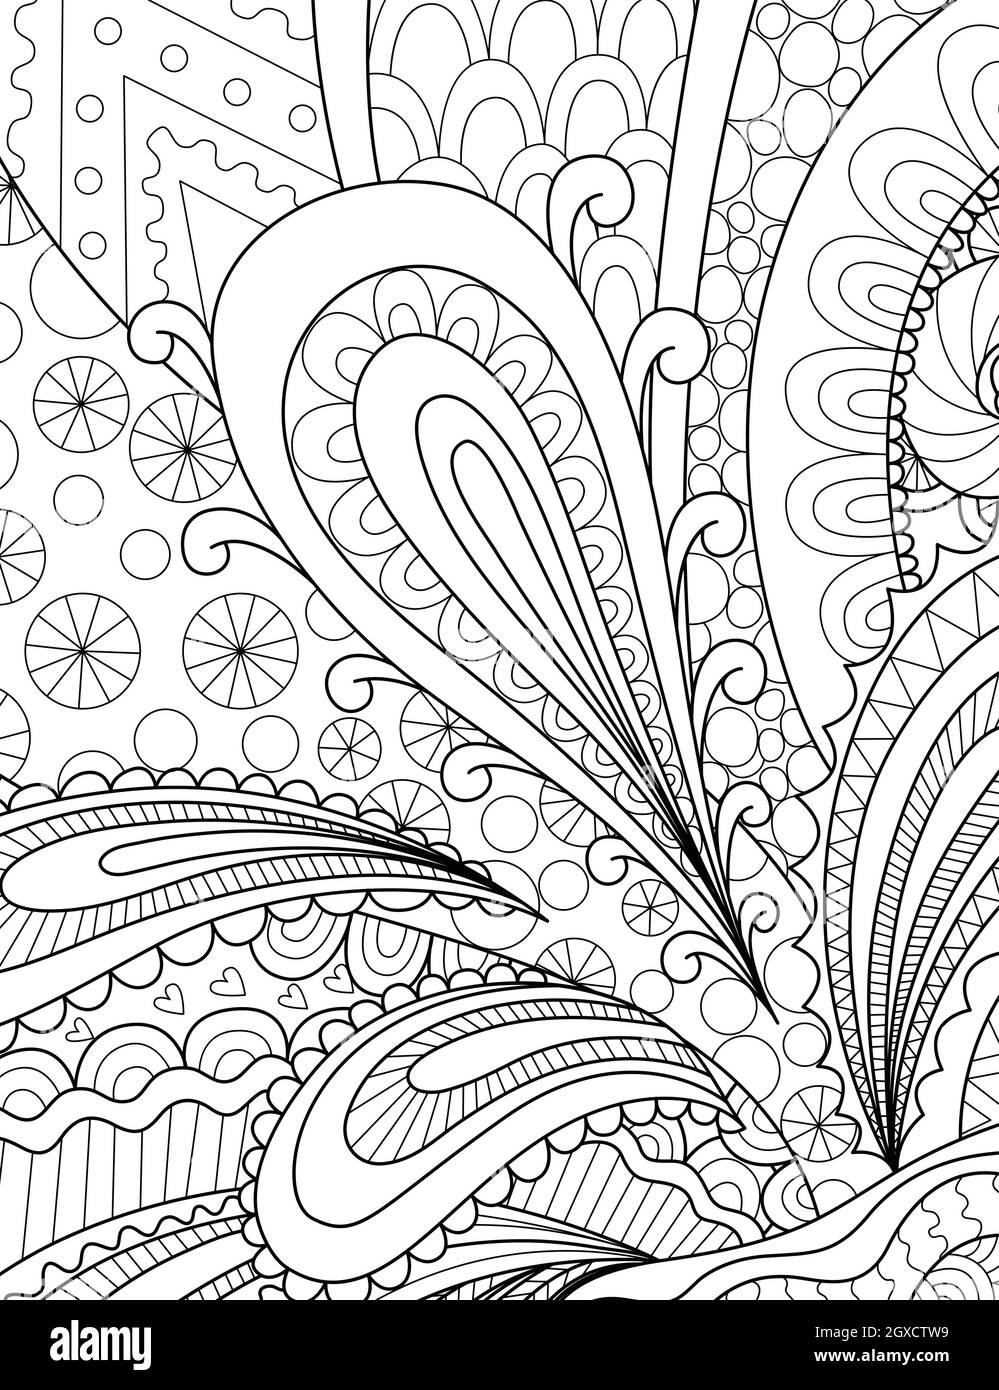 Printable Adult Coloring Pages Abstract